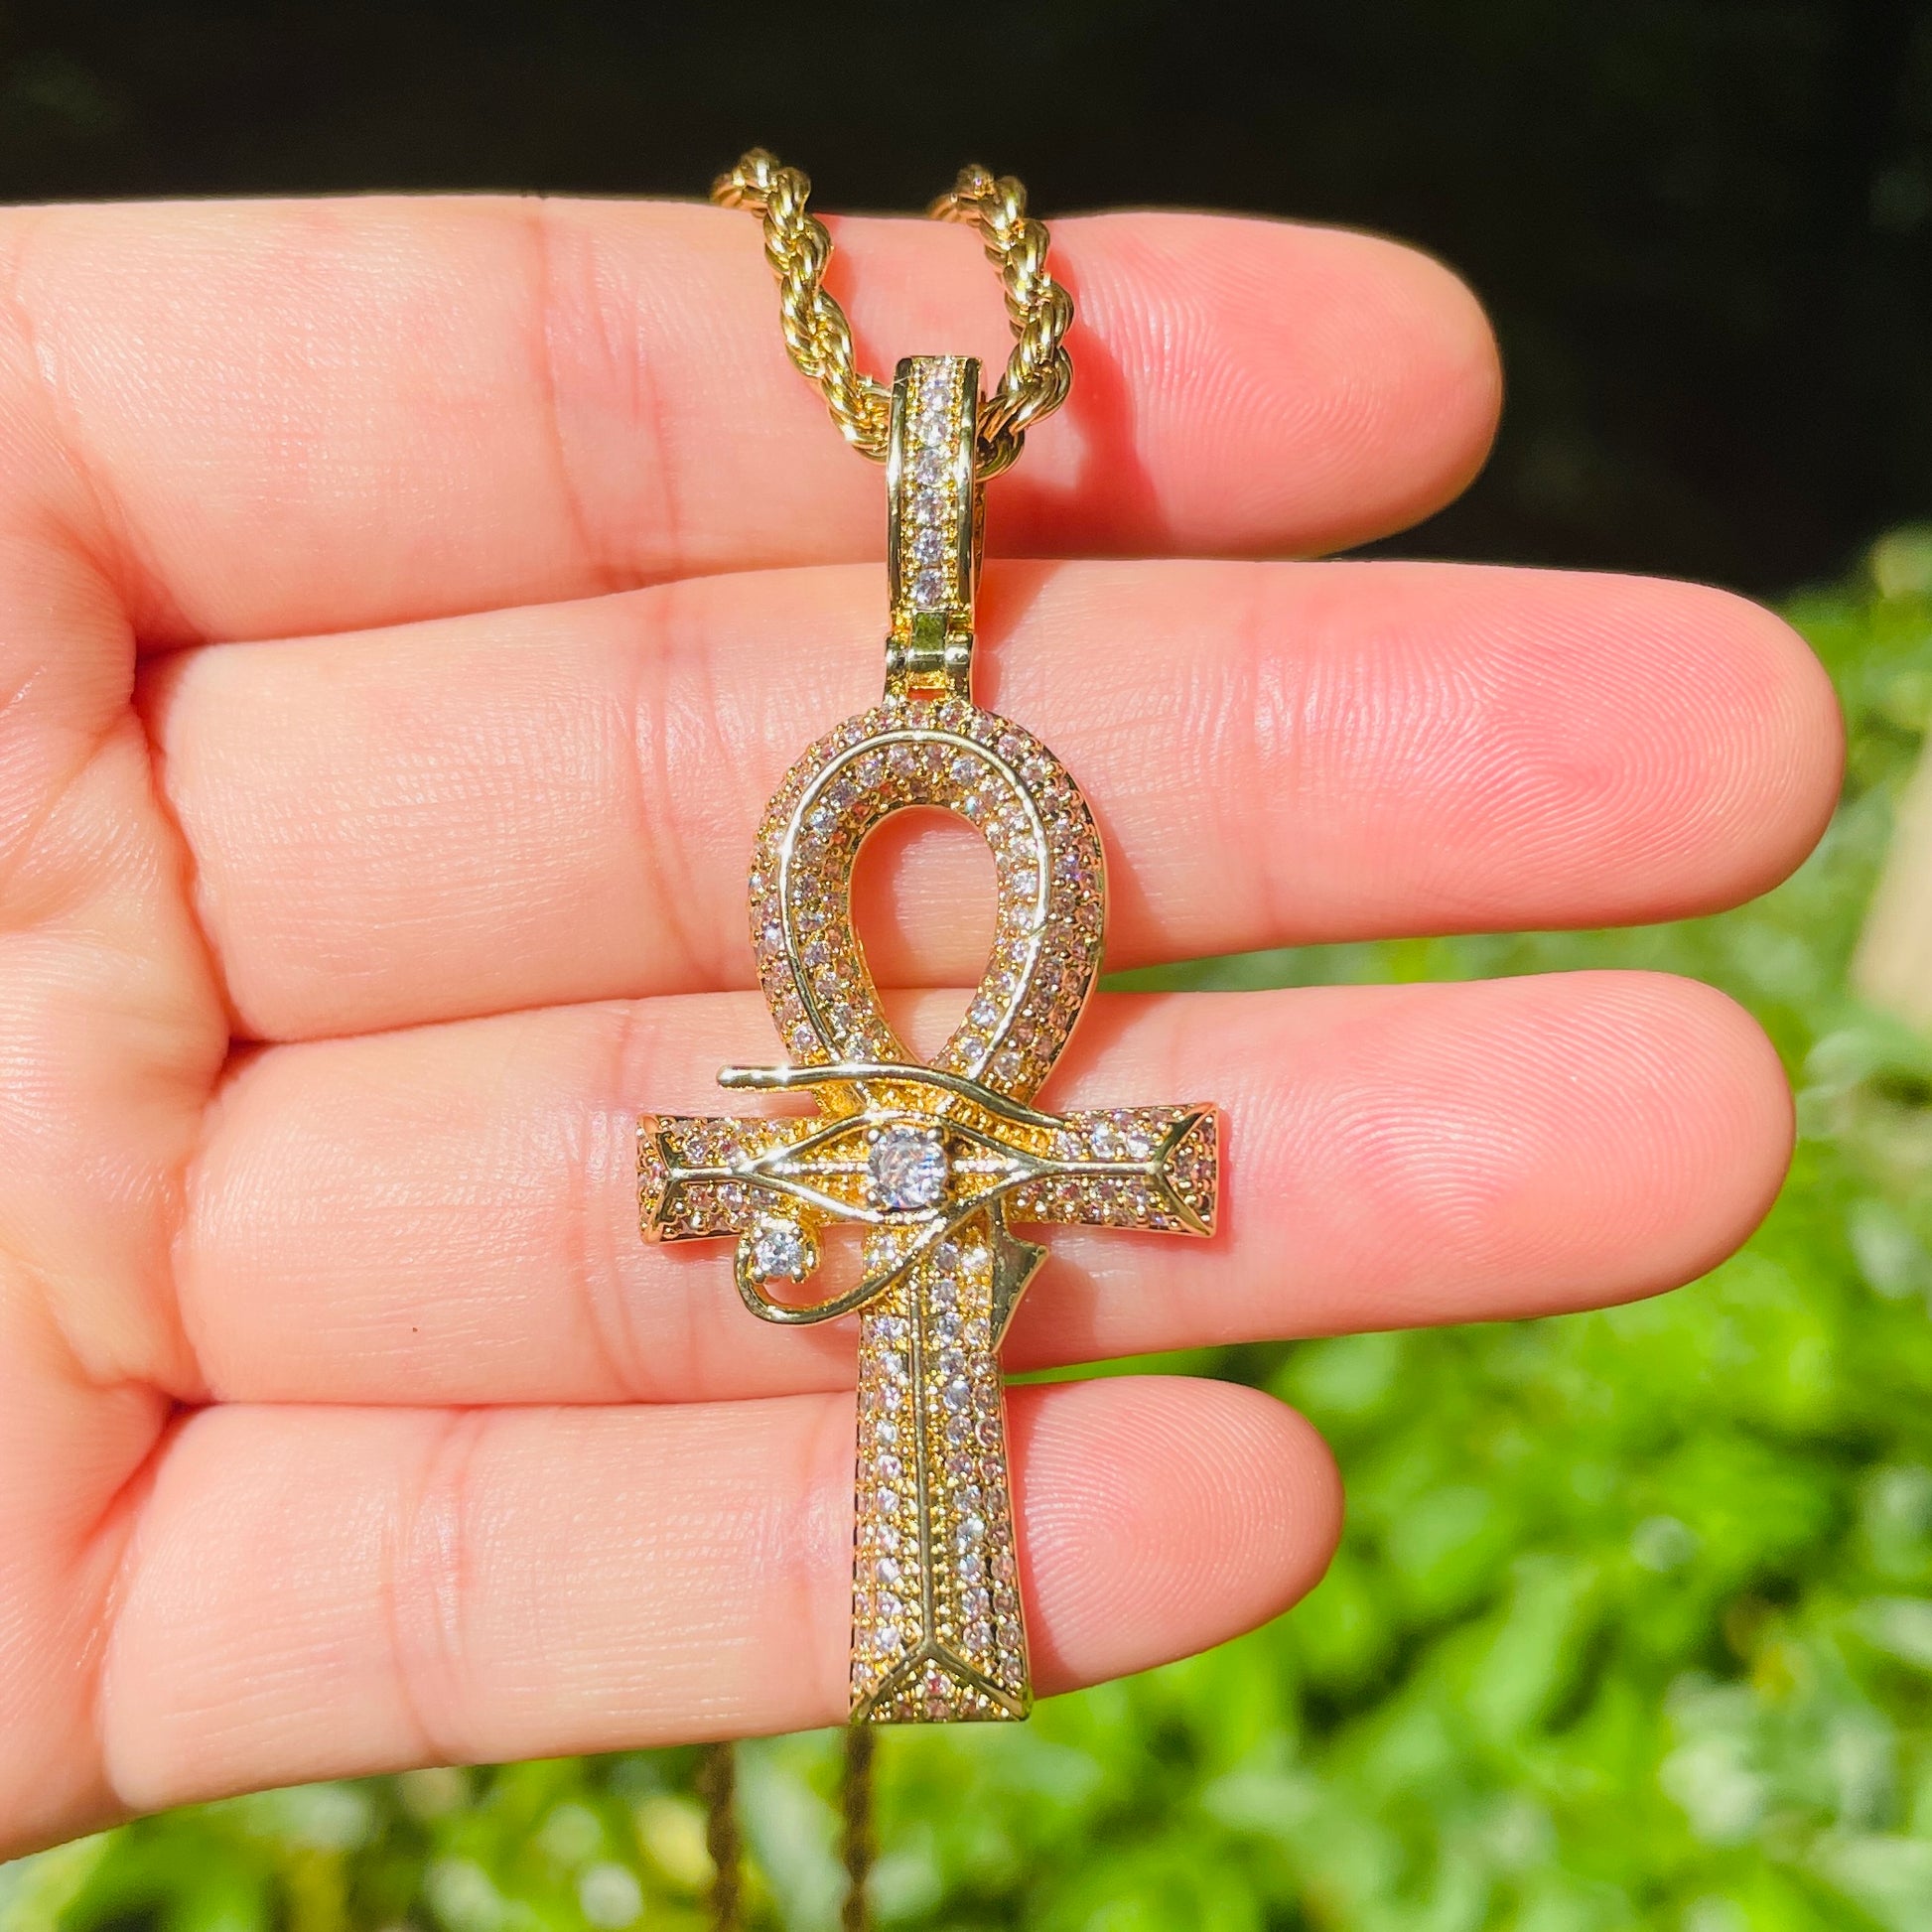 5pcs/lot 18/20/24 inch Stainless Steel Rope Chain CZ Pave Egypt Eyes of Horus ANKH Cross Necklace Necklaces Charms Beads Beyond